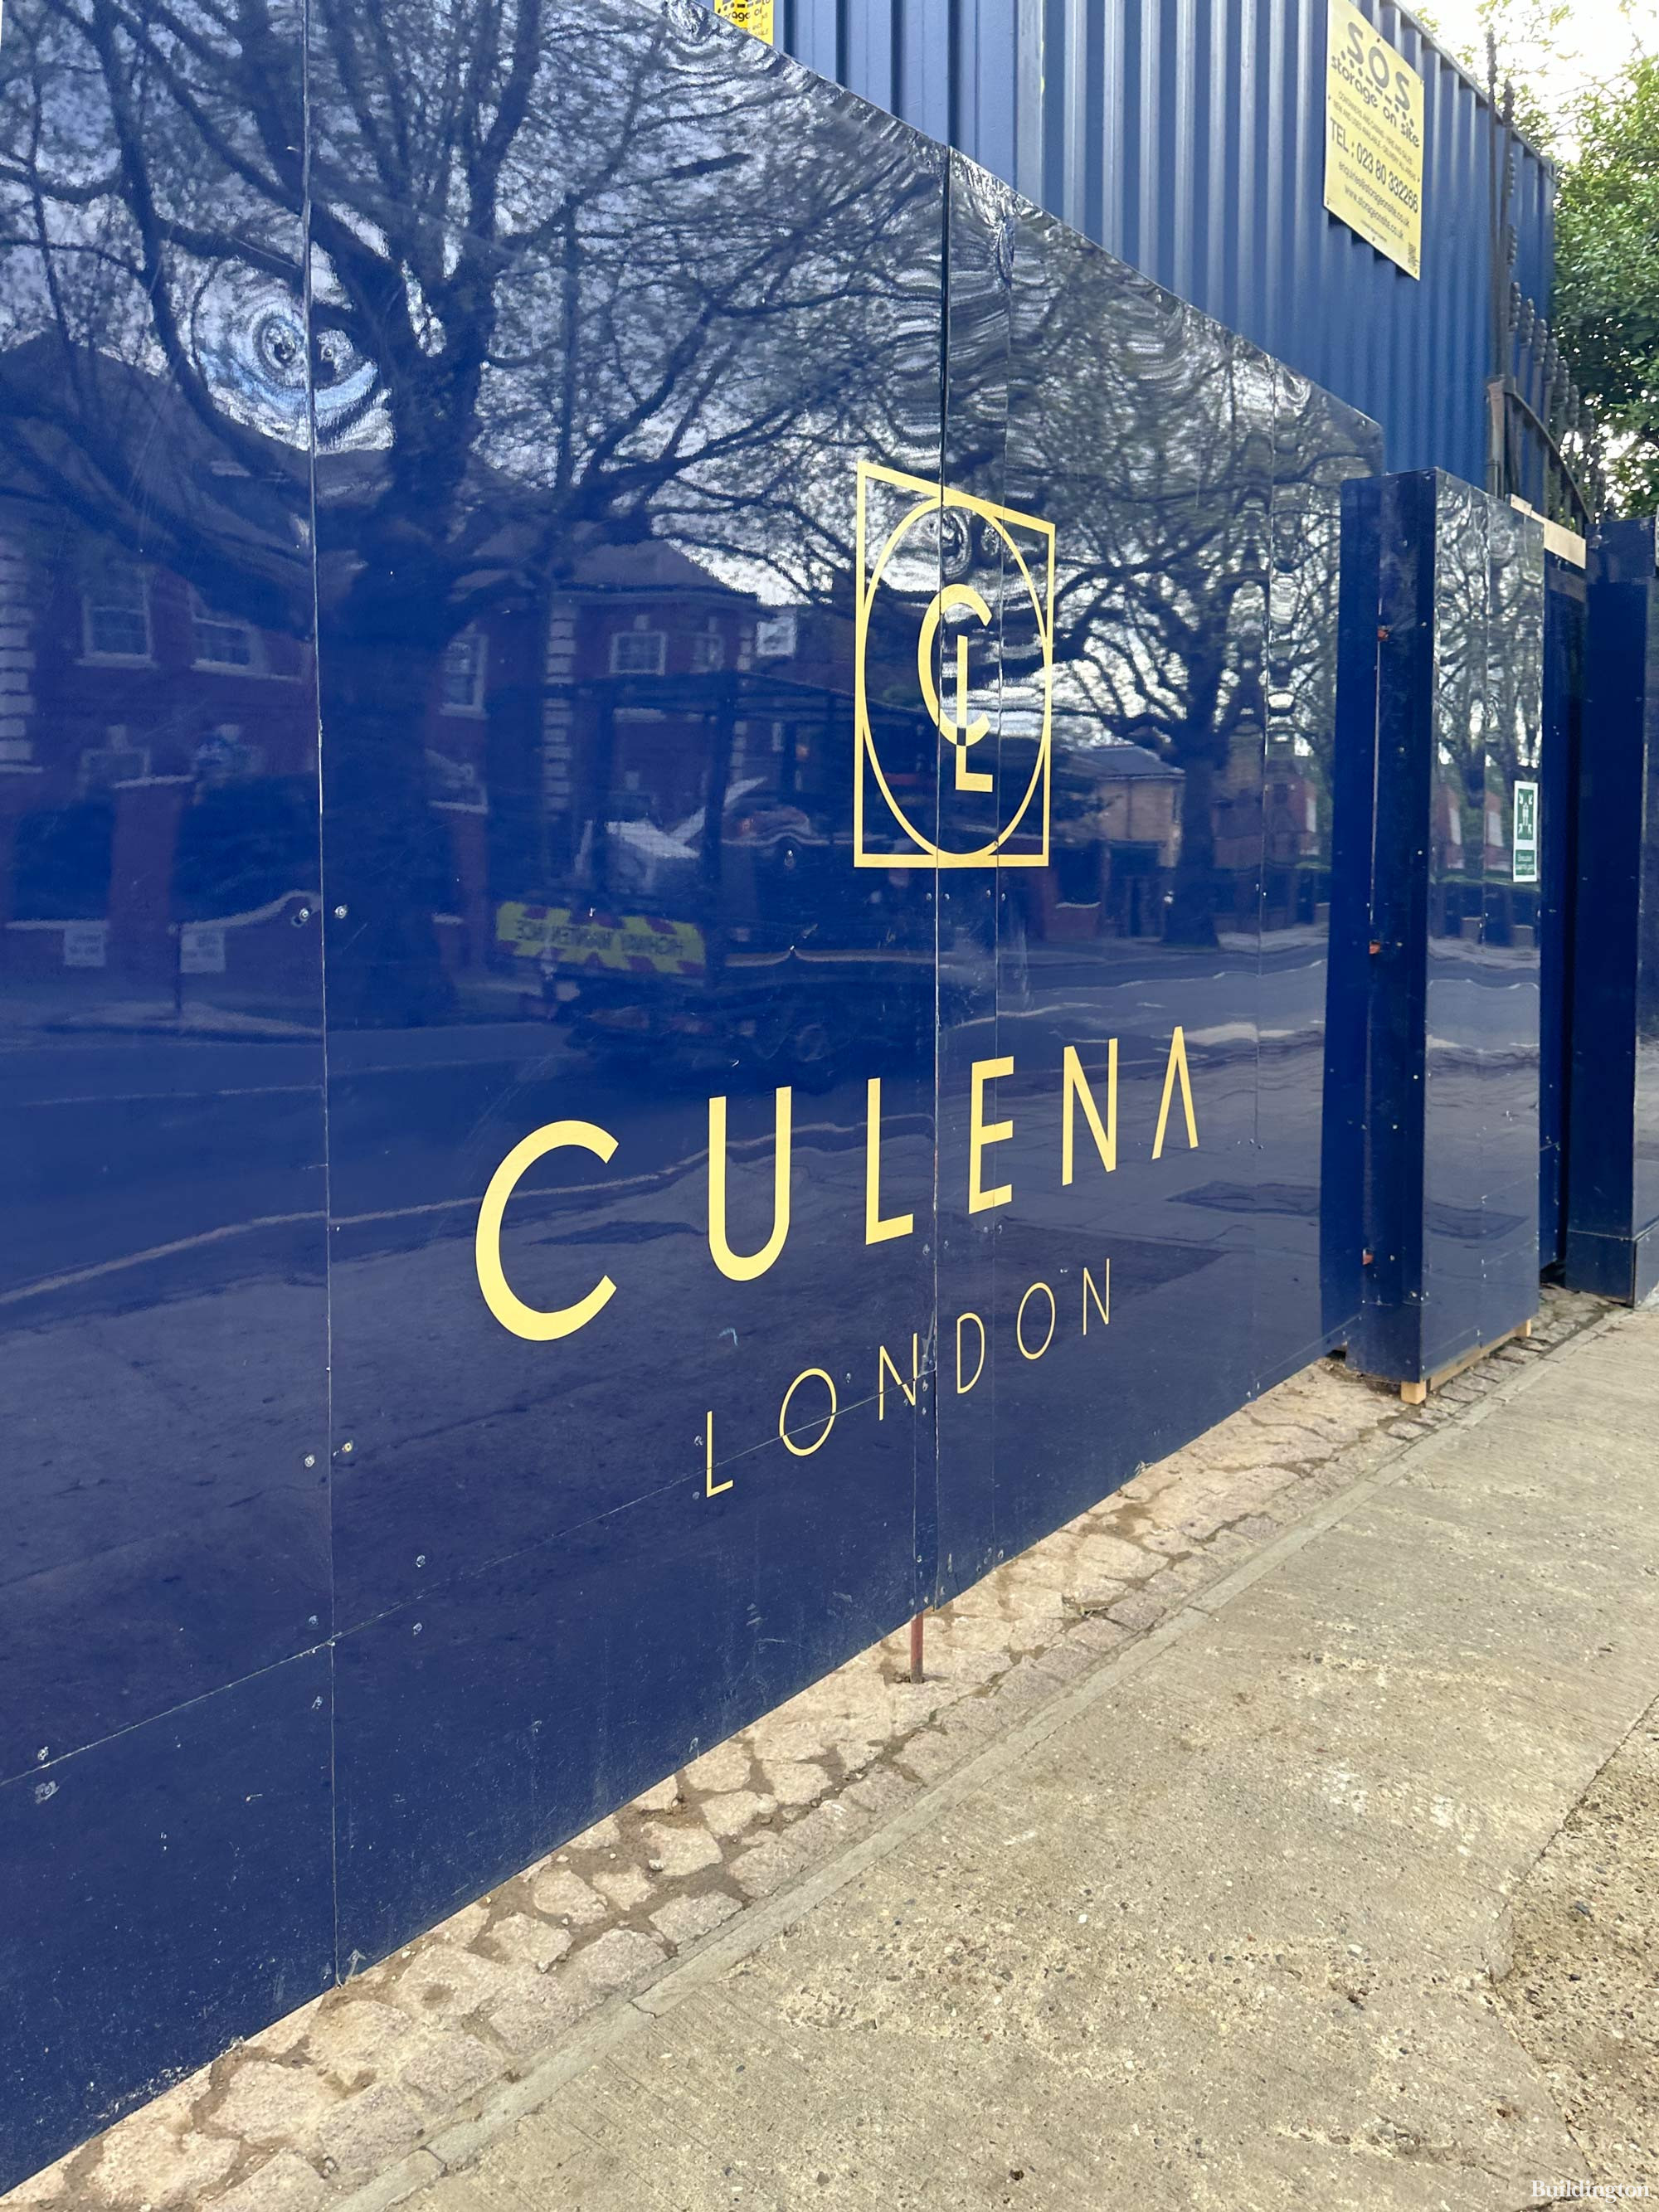 Culena London at 46 Avenue Road luxury private house development in St John's Wood NW8